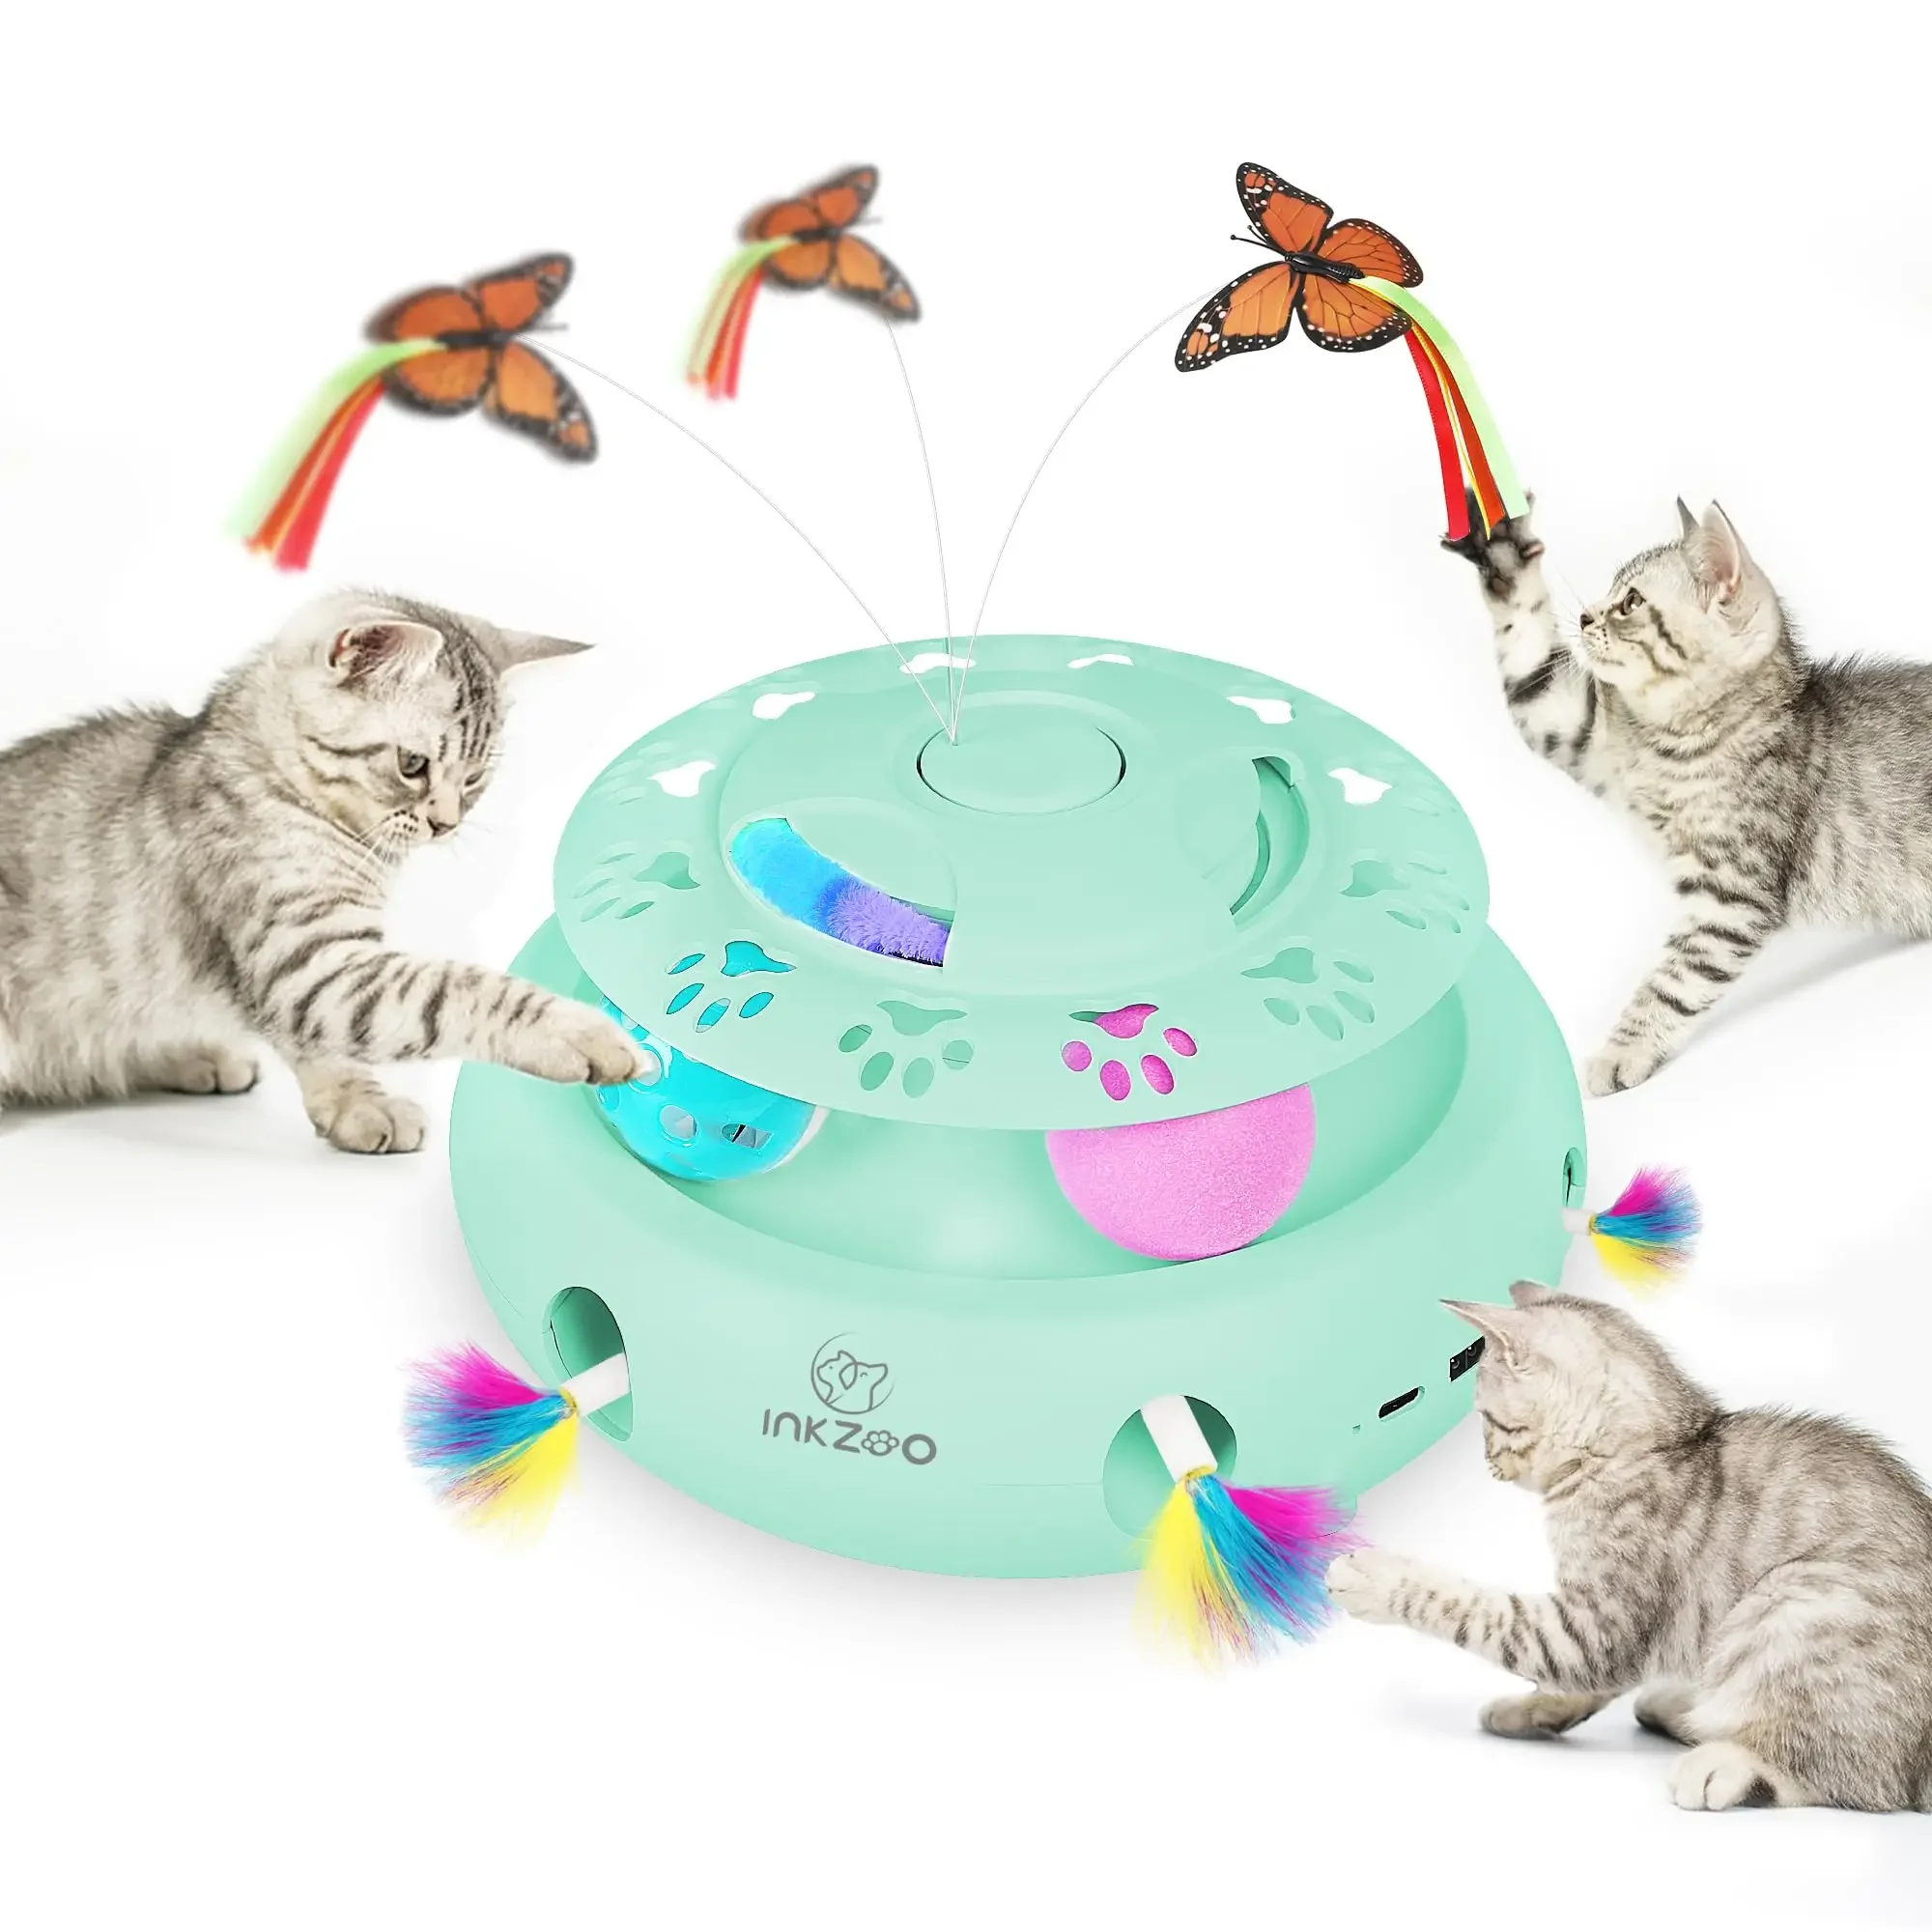 

PERKEO 4-in-1 Interactive Cat Toys for Indoor Cats, Automatic 6 Holes Mice Whack-A-Mole, Fluttering Butterfly, Track Balls, USB